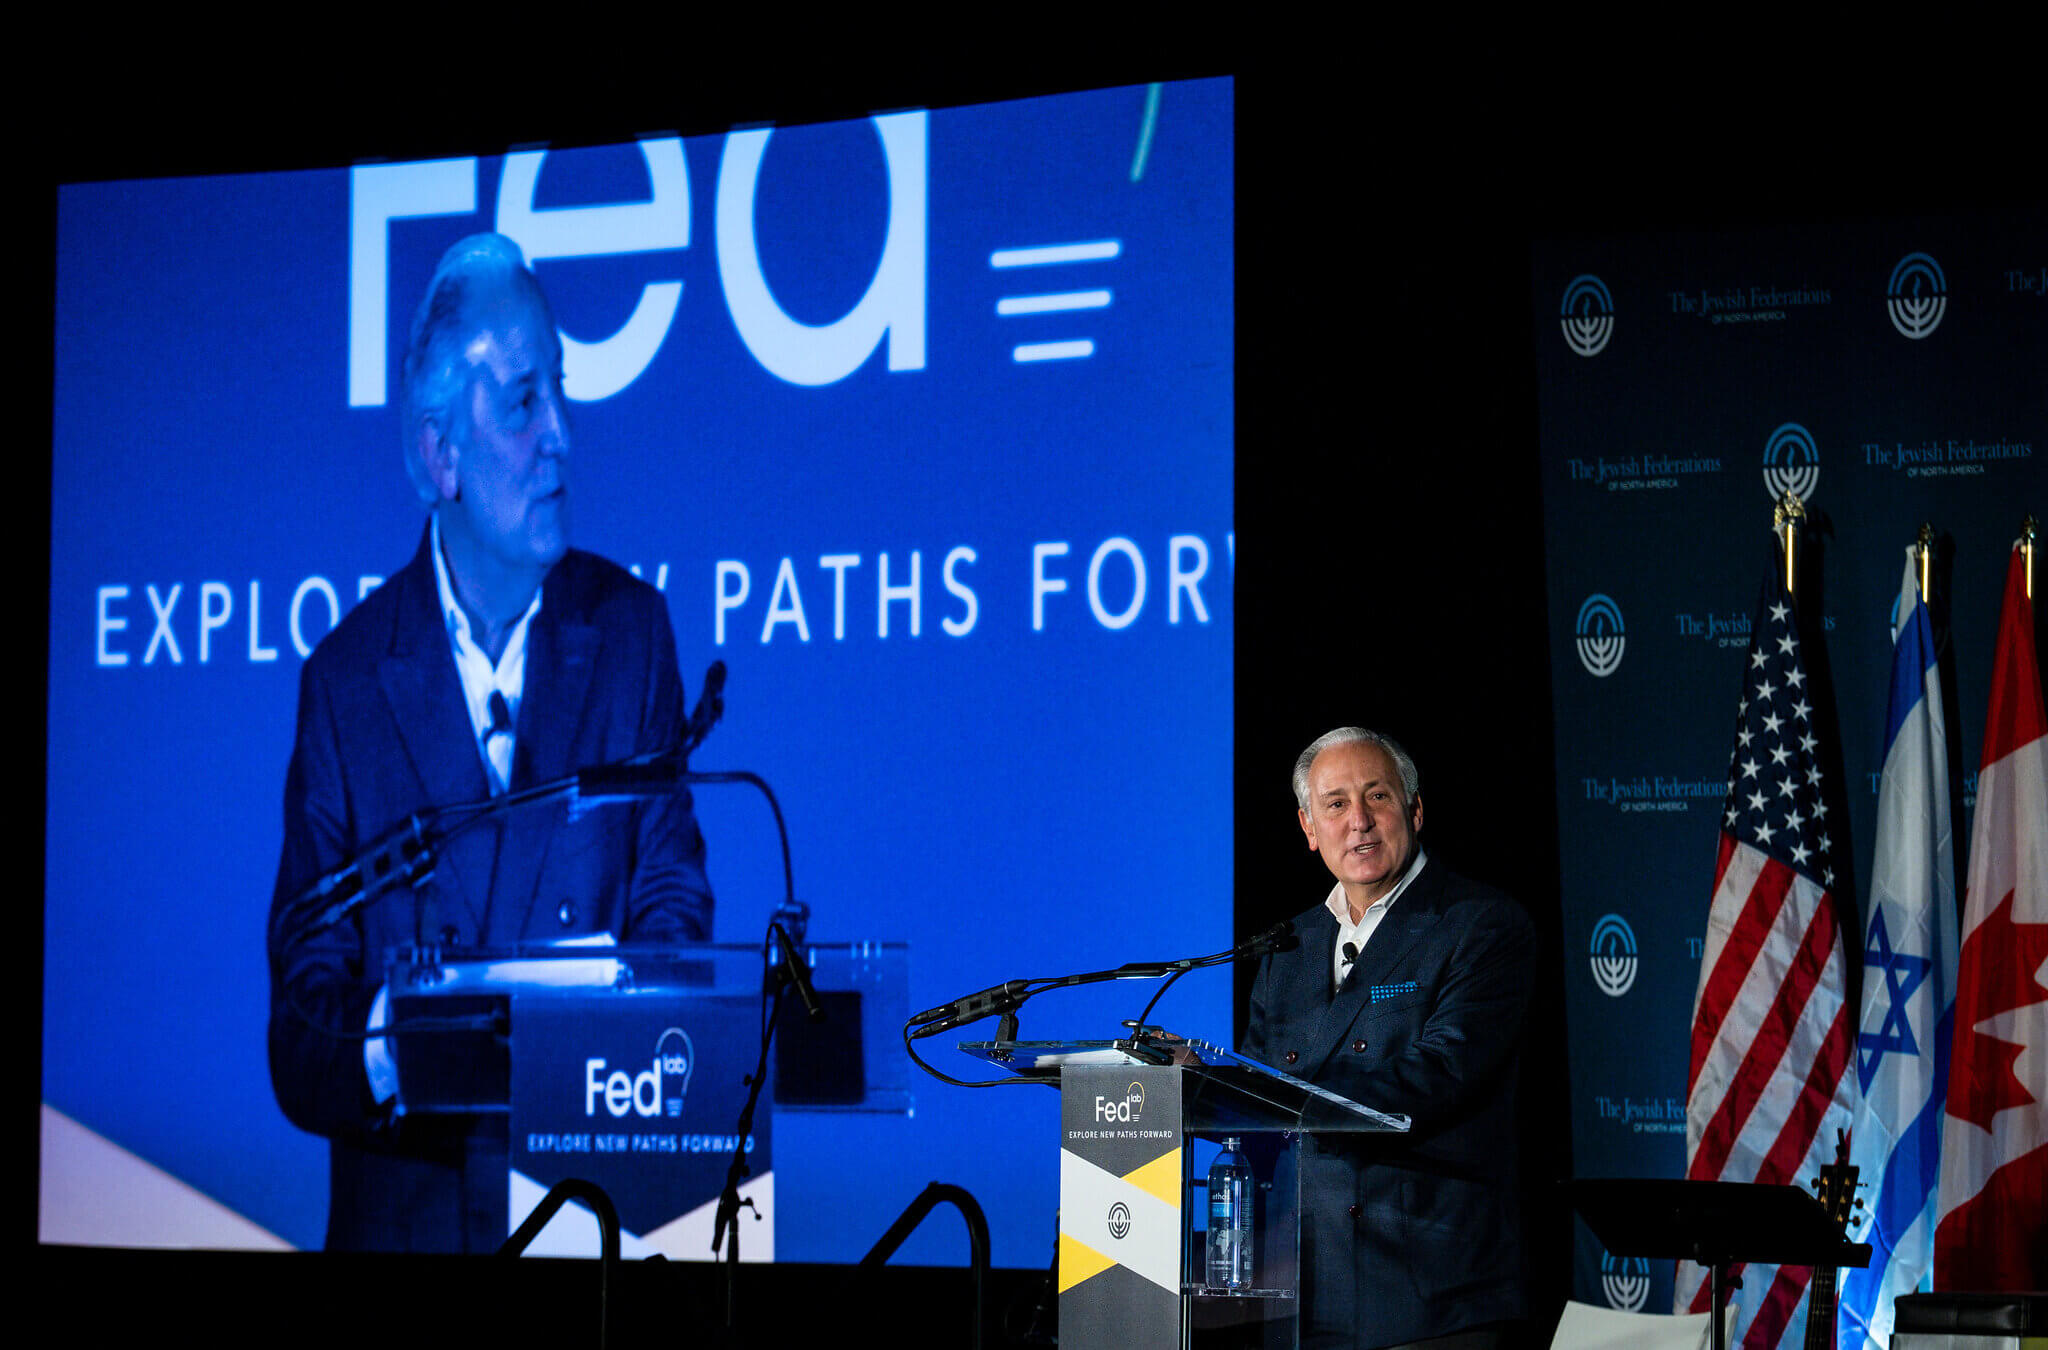 Eric Fingerhut, head of the Jewish Federations of North America, speaks at the organization’s 2019 conference. Fingerhut released a statement opposing the Supreme Court’s decision to overturn Roe v. Wade on Wednesday, nearly a month after the ruling was released.